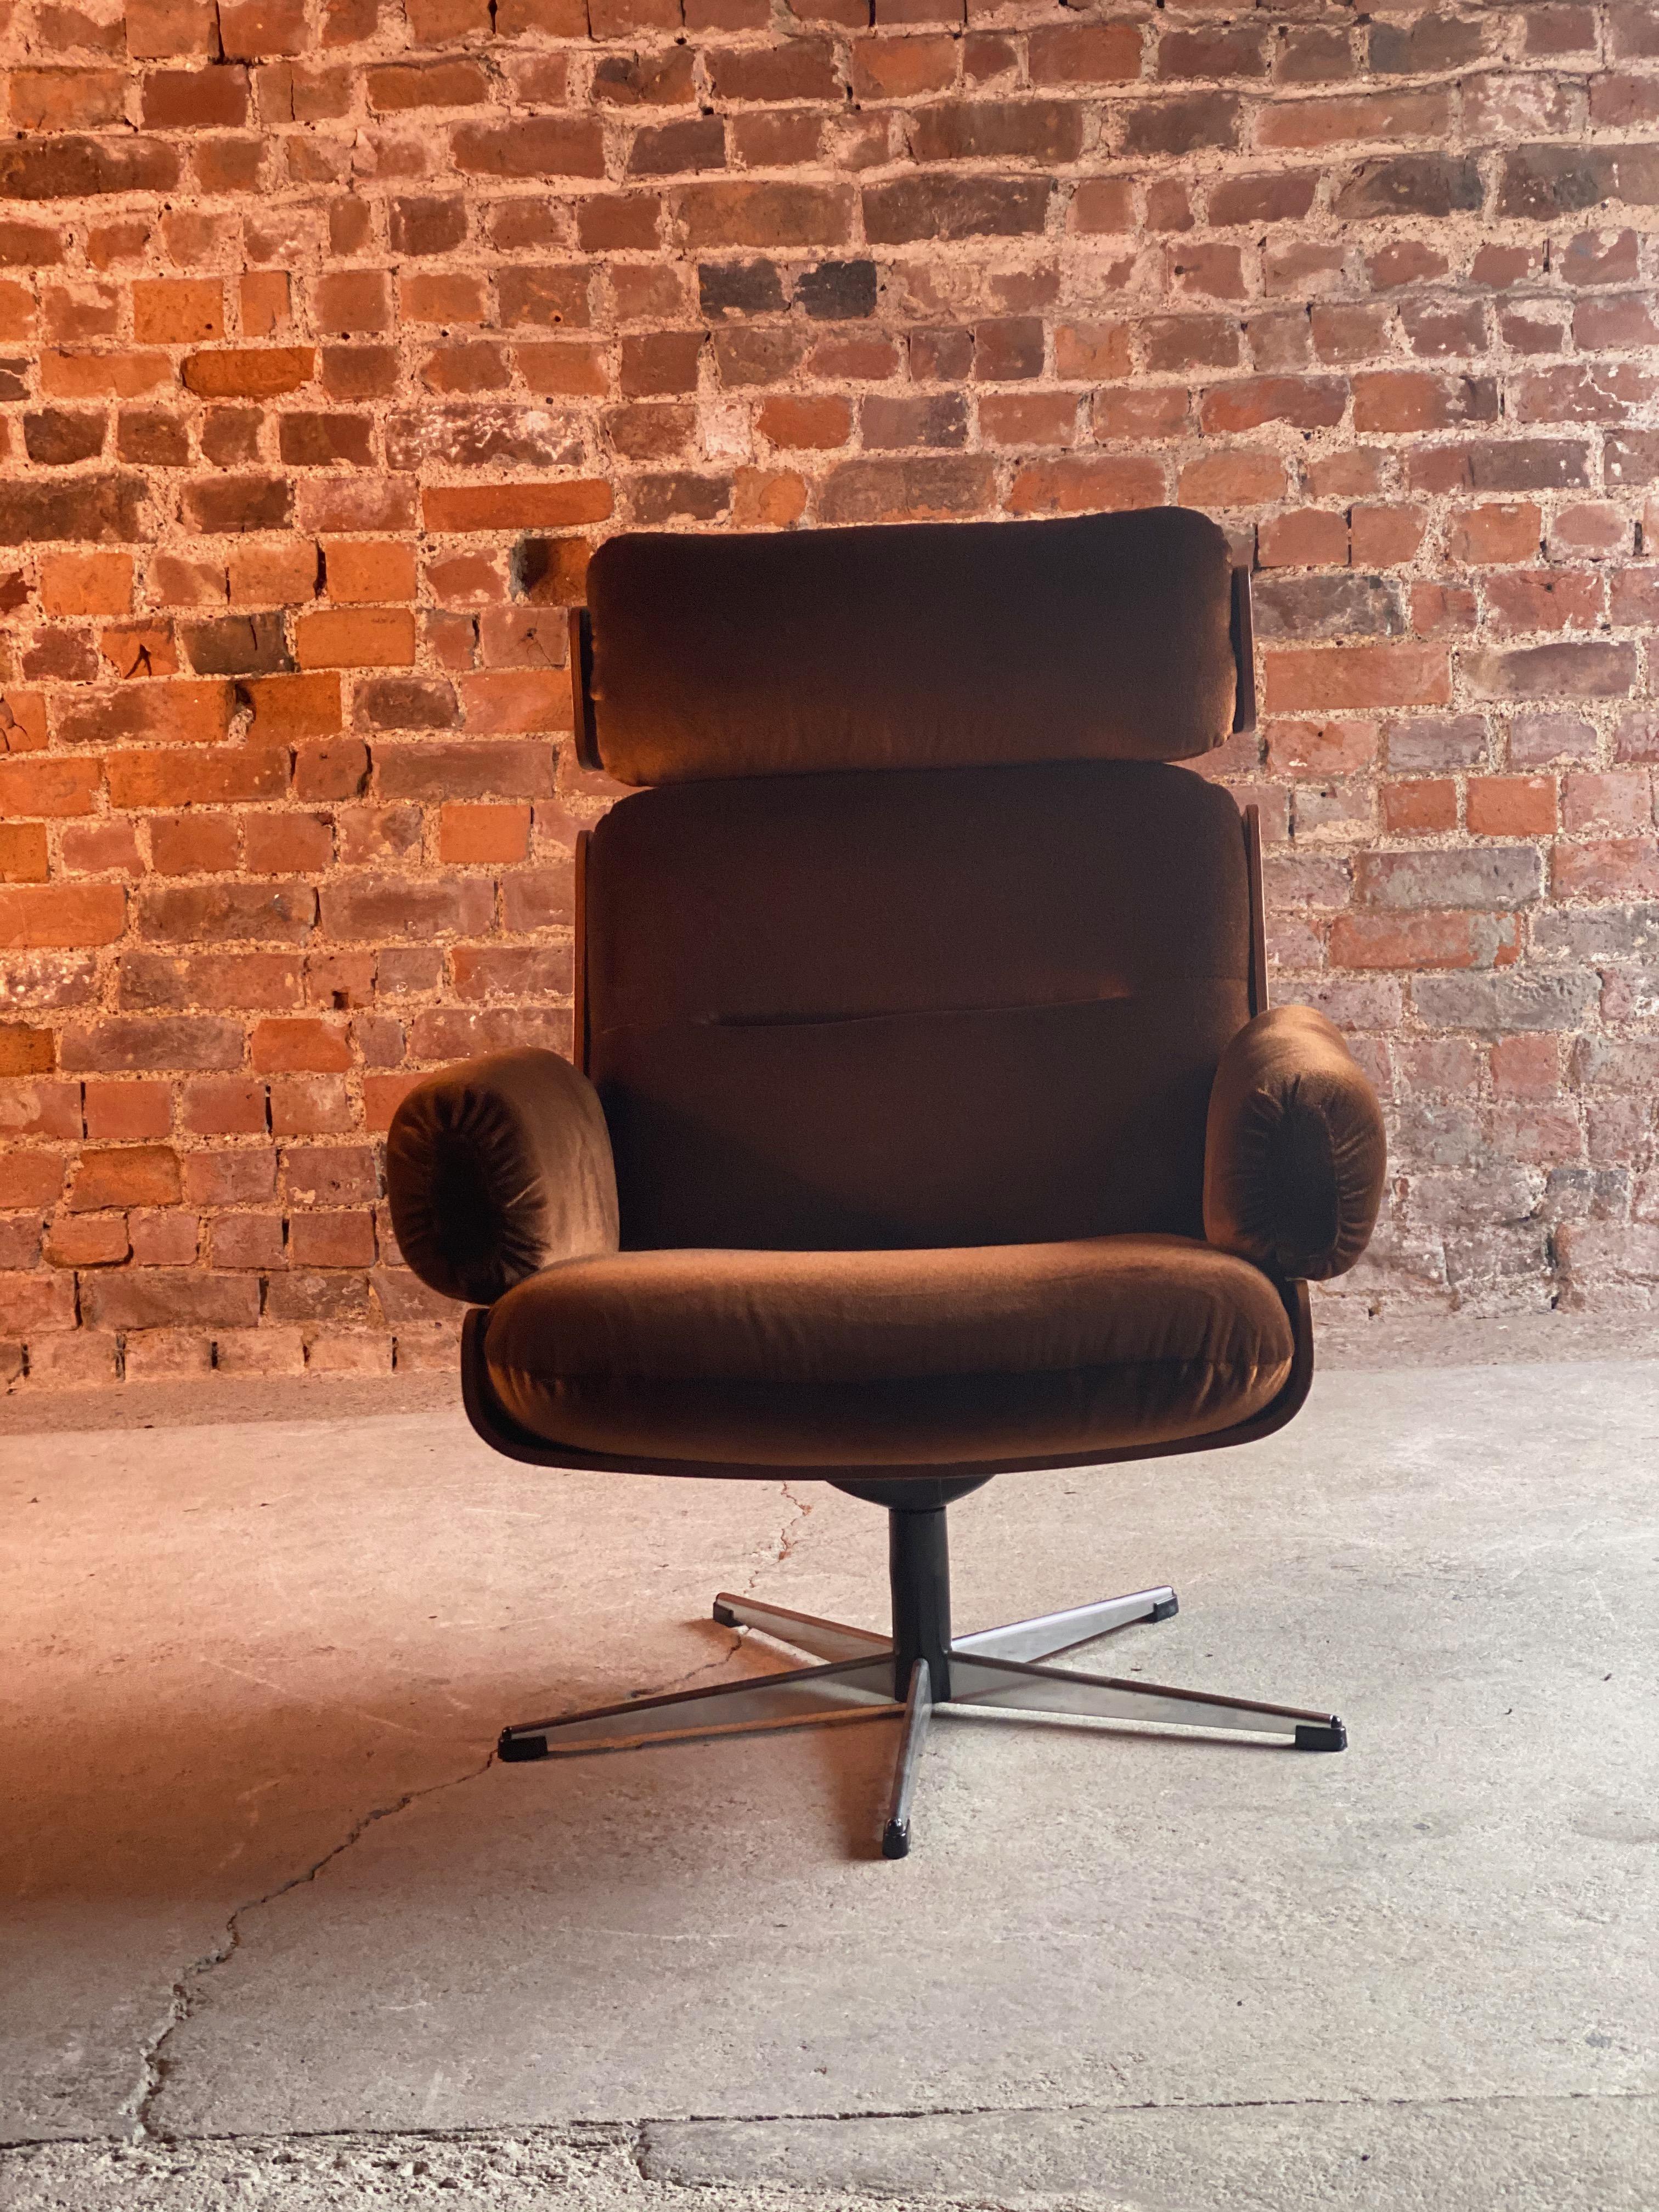 Guy Rogers Lounge Chair Eames Plycraft Style Mad Men Era Midcentury, 1960s In Excellent Condition In Longdon, Tewkesbury